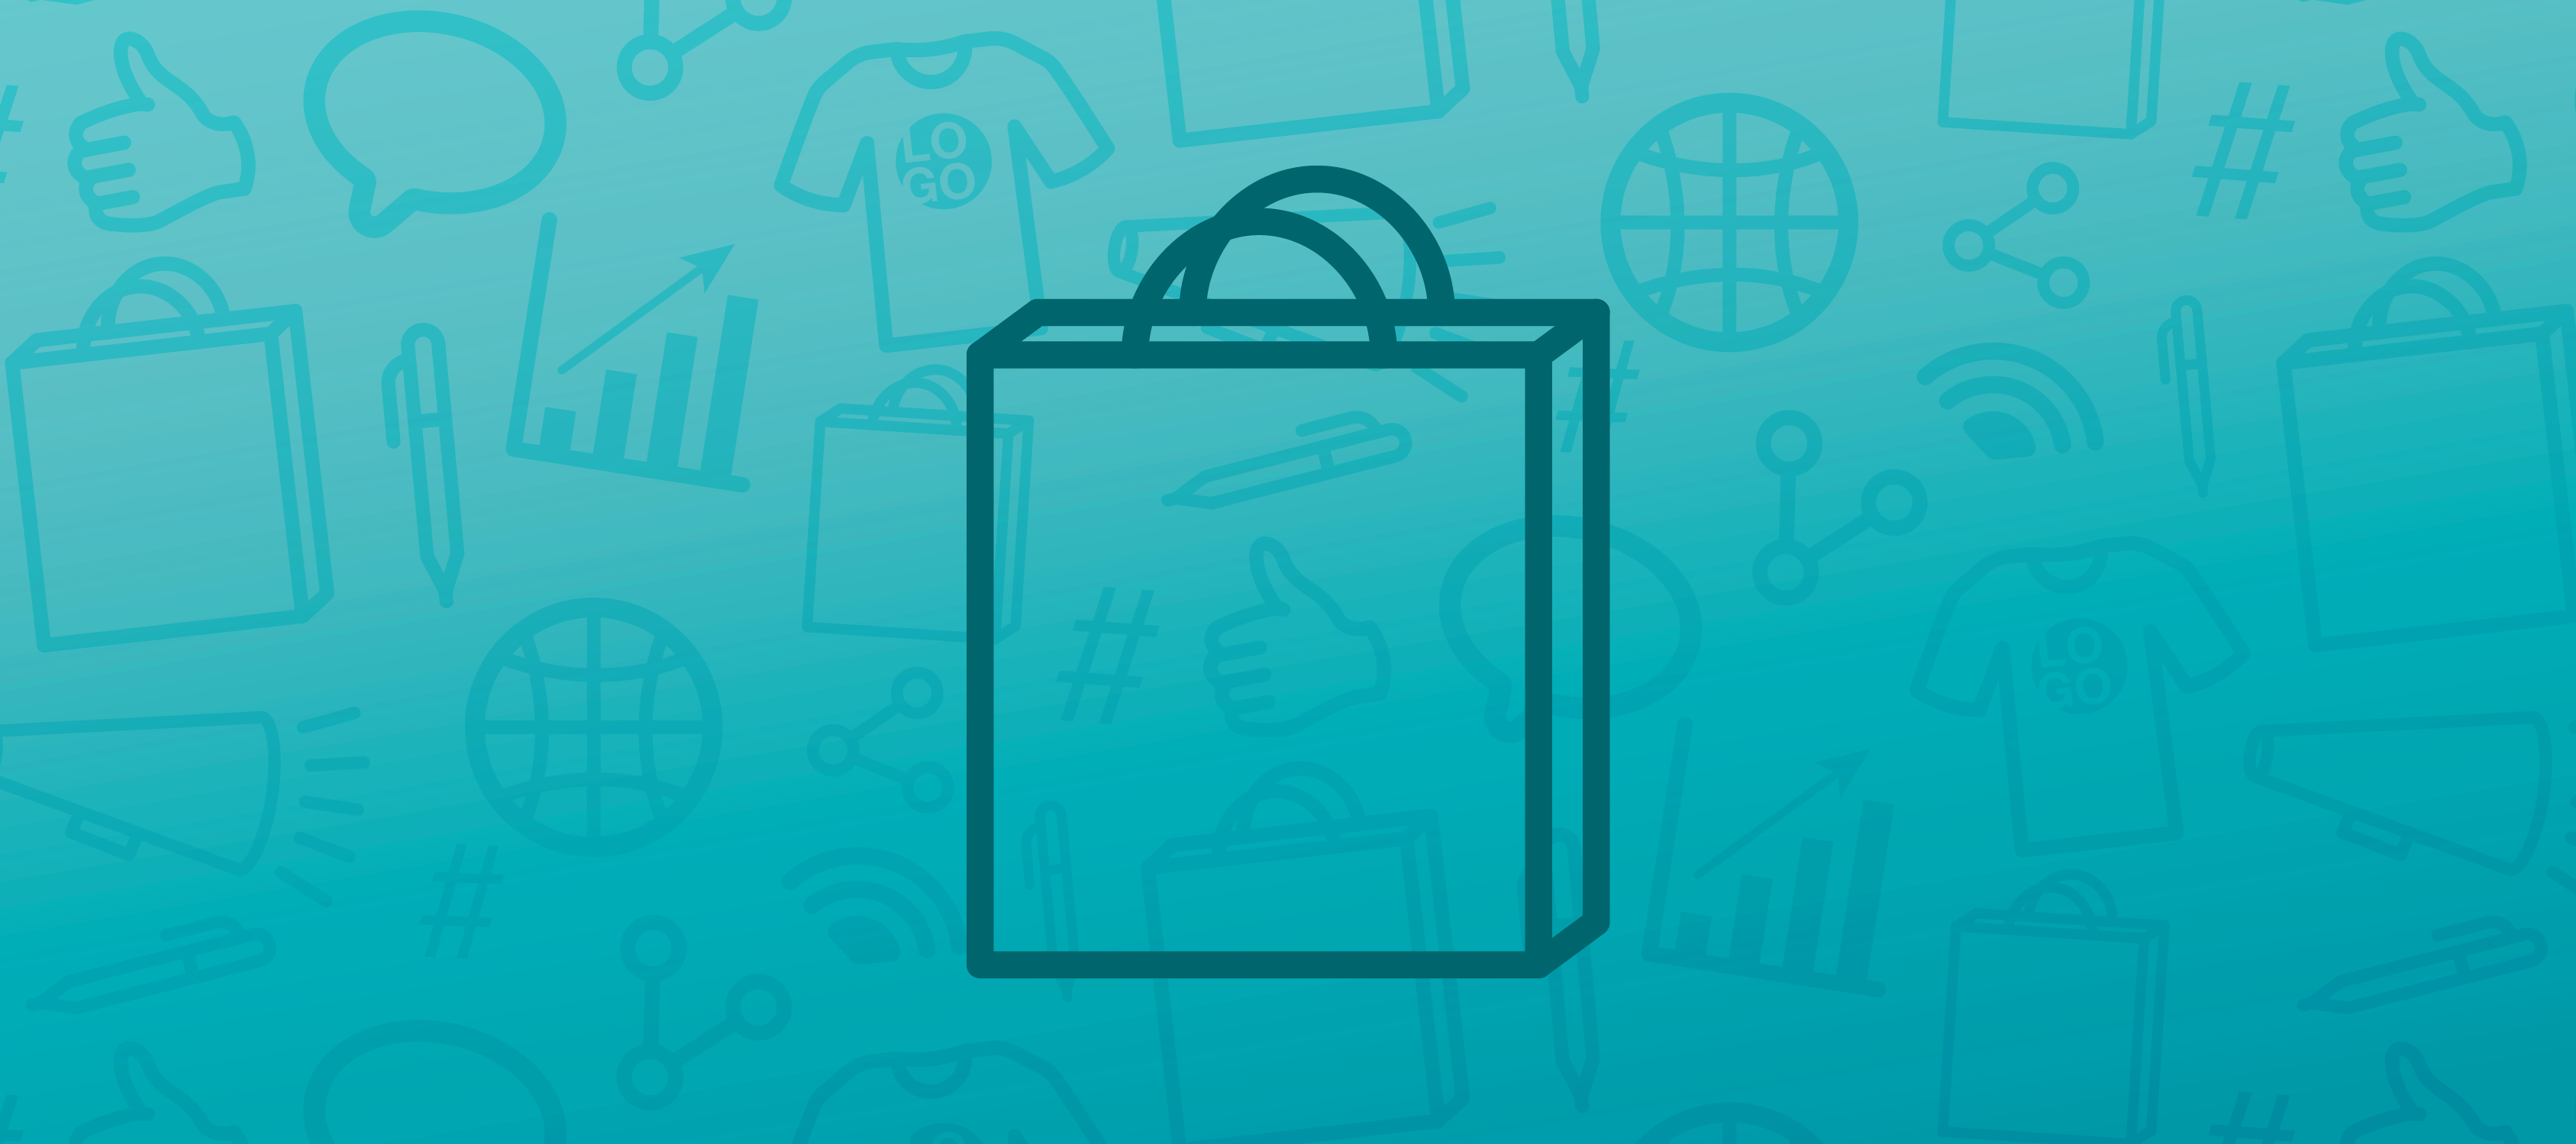 A blue header banner with a shopping bag featured in the middle and a light pattern of marketing-related icons in the background